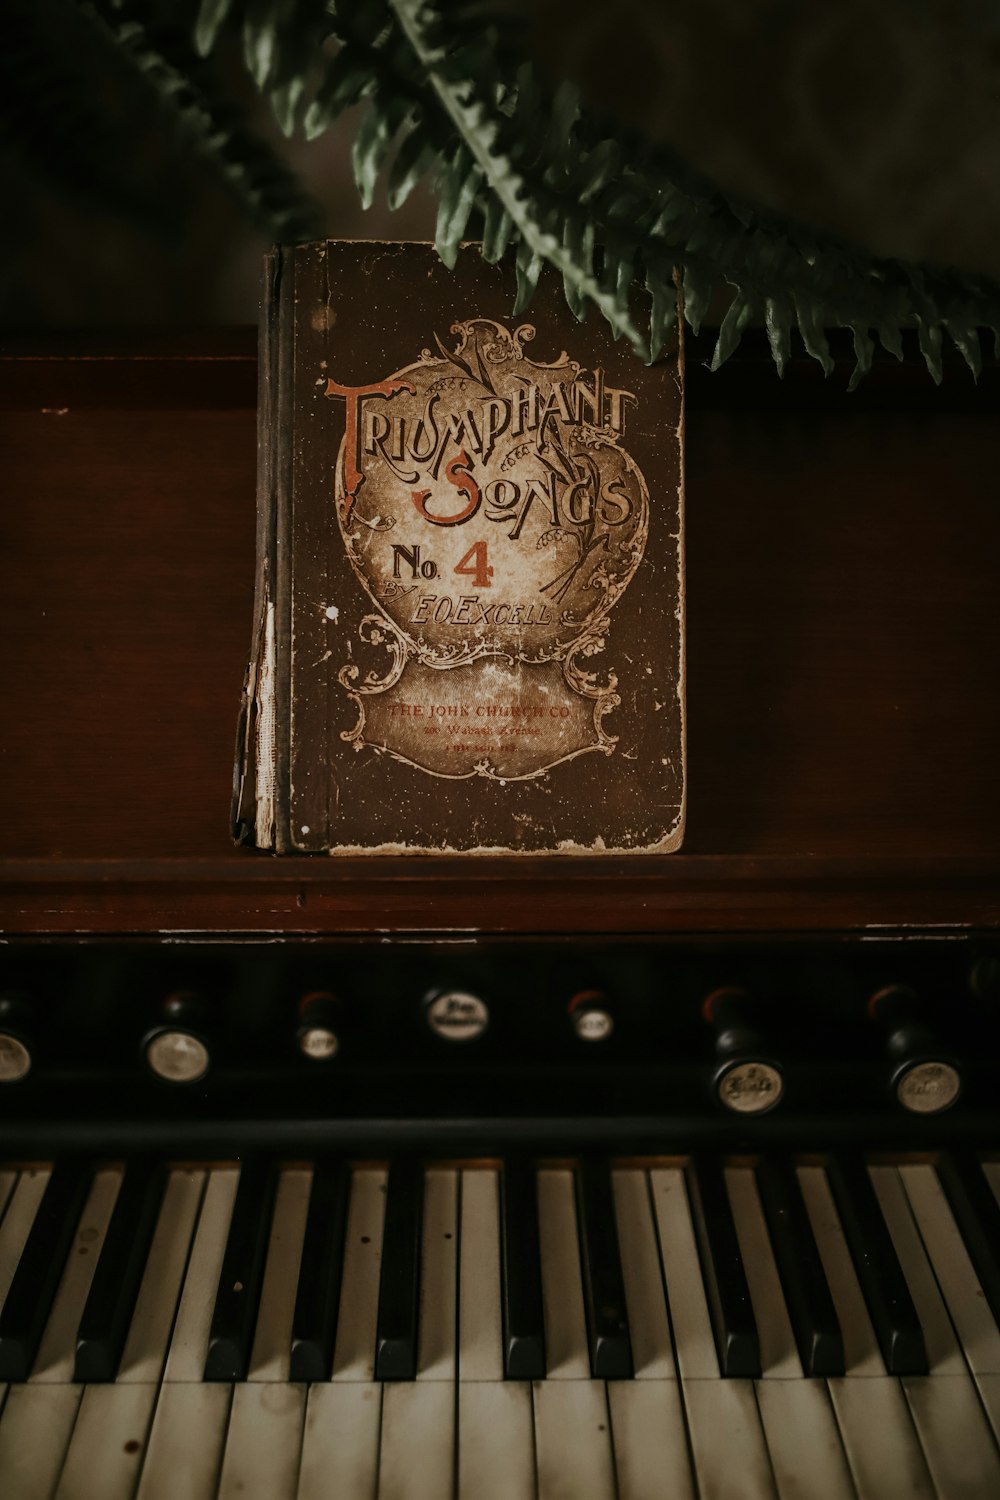 brown piano